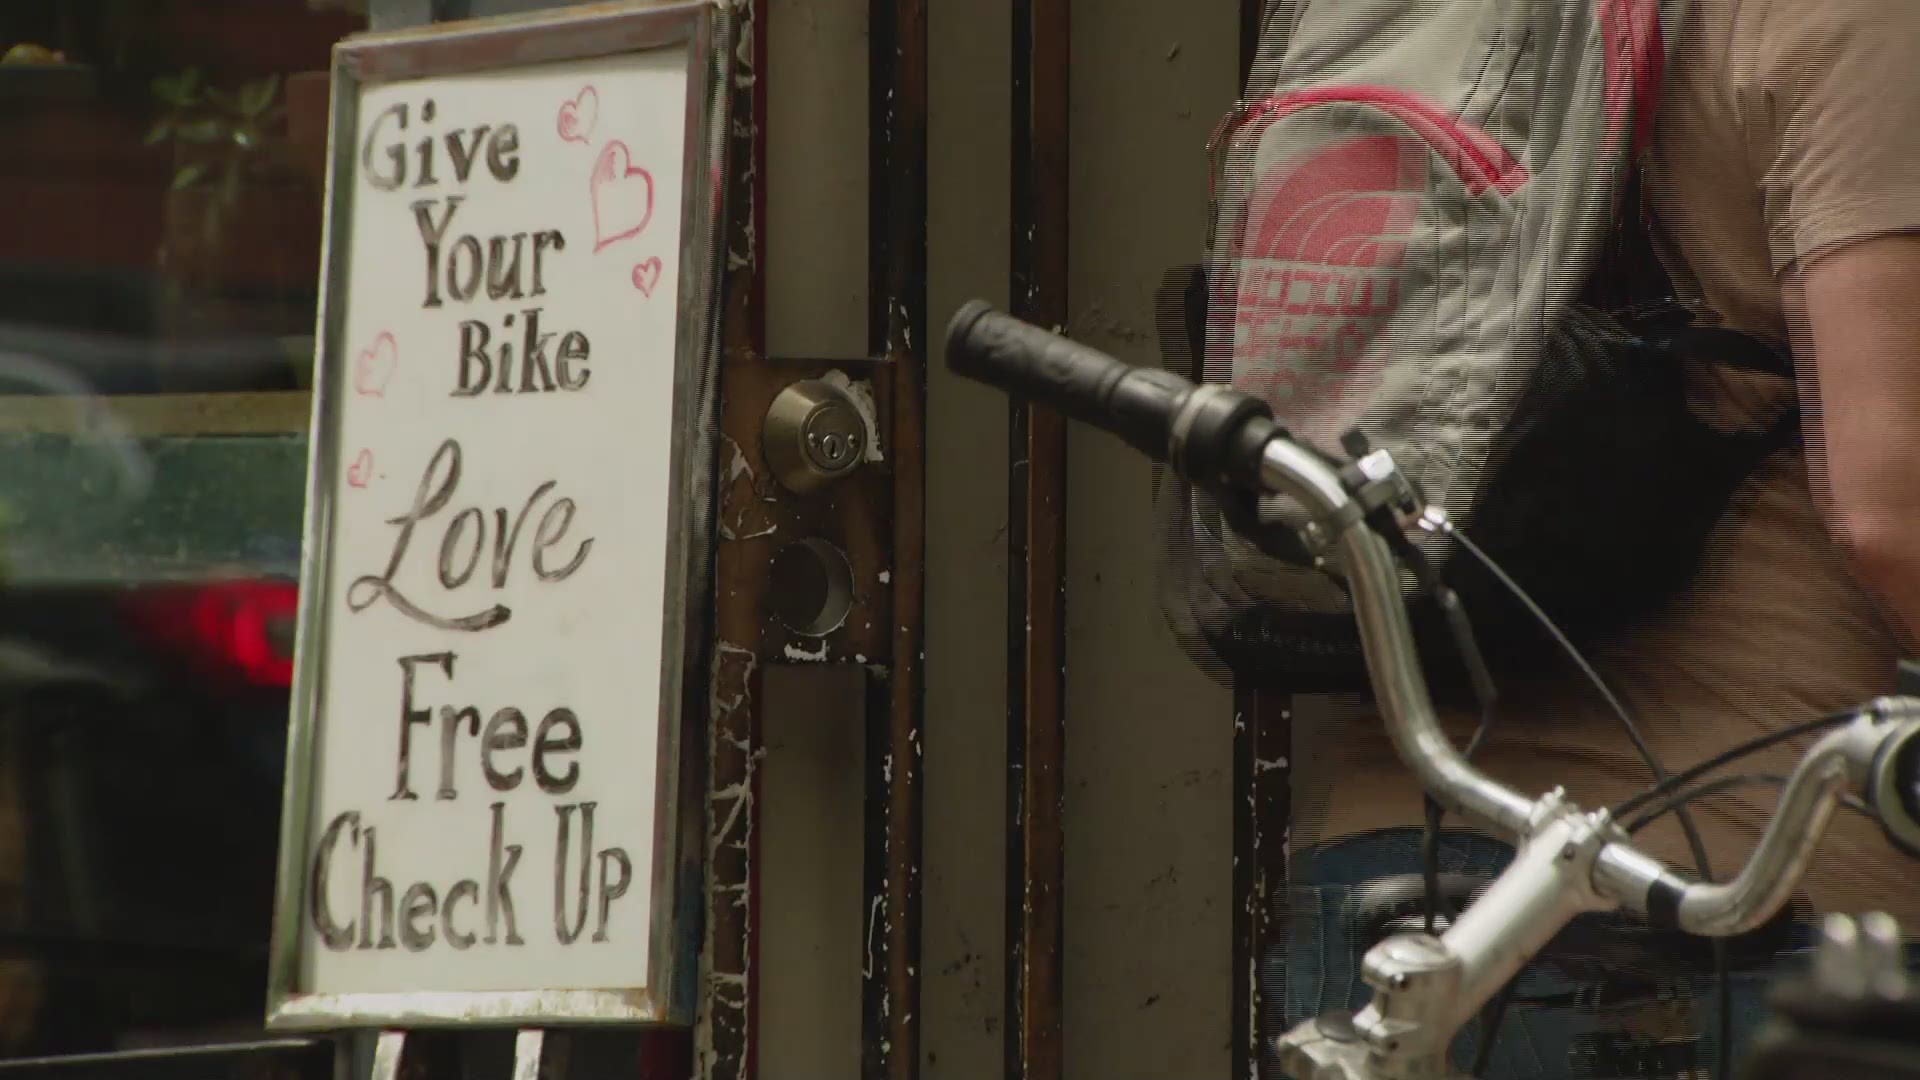 Bike stores, weddings, restaurants and more are said to have been impacted in some way.